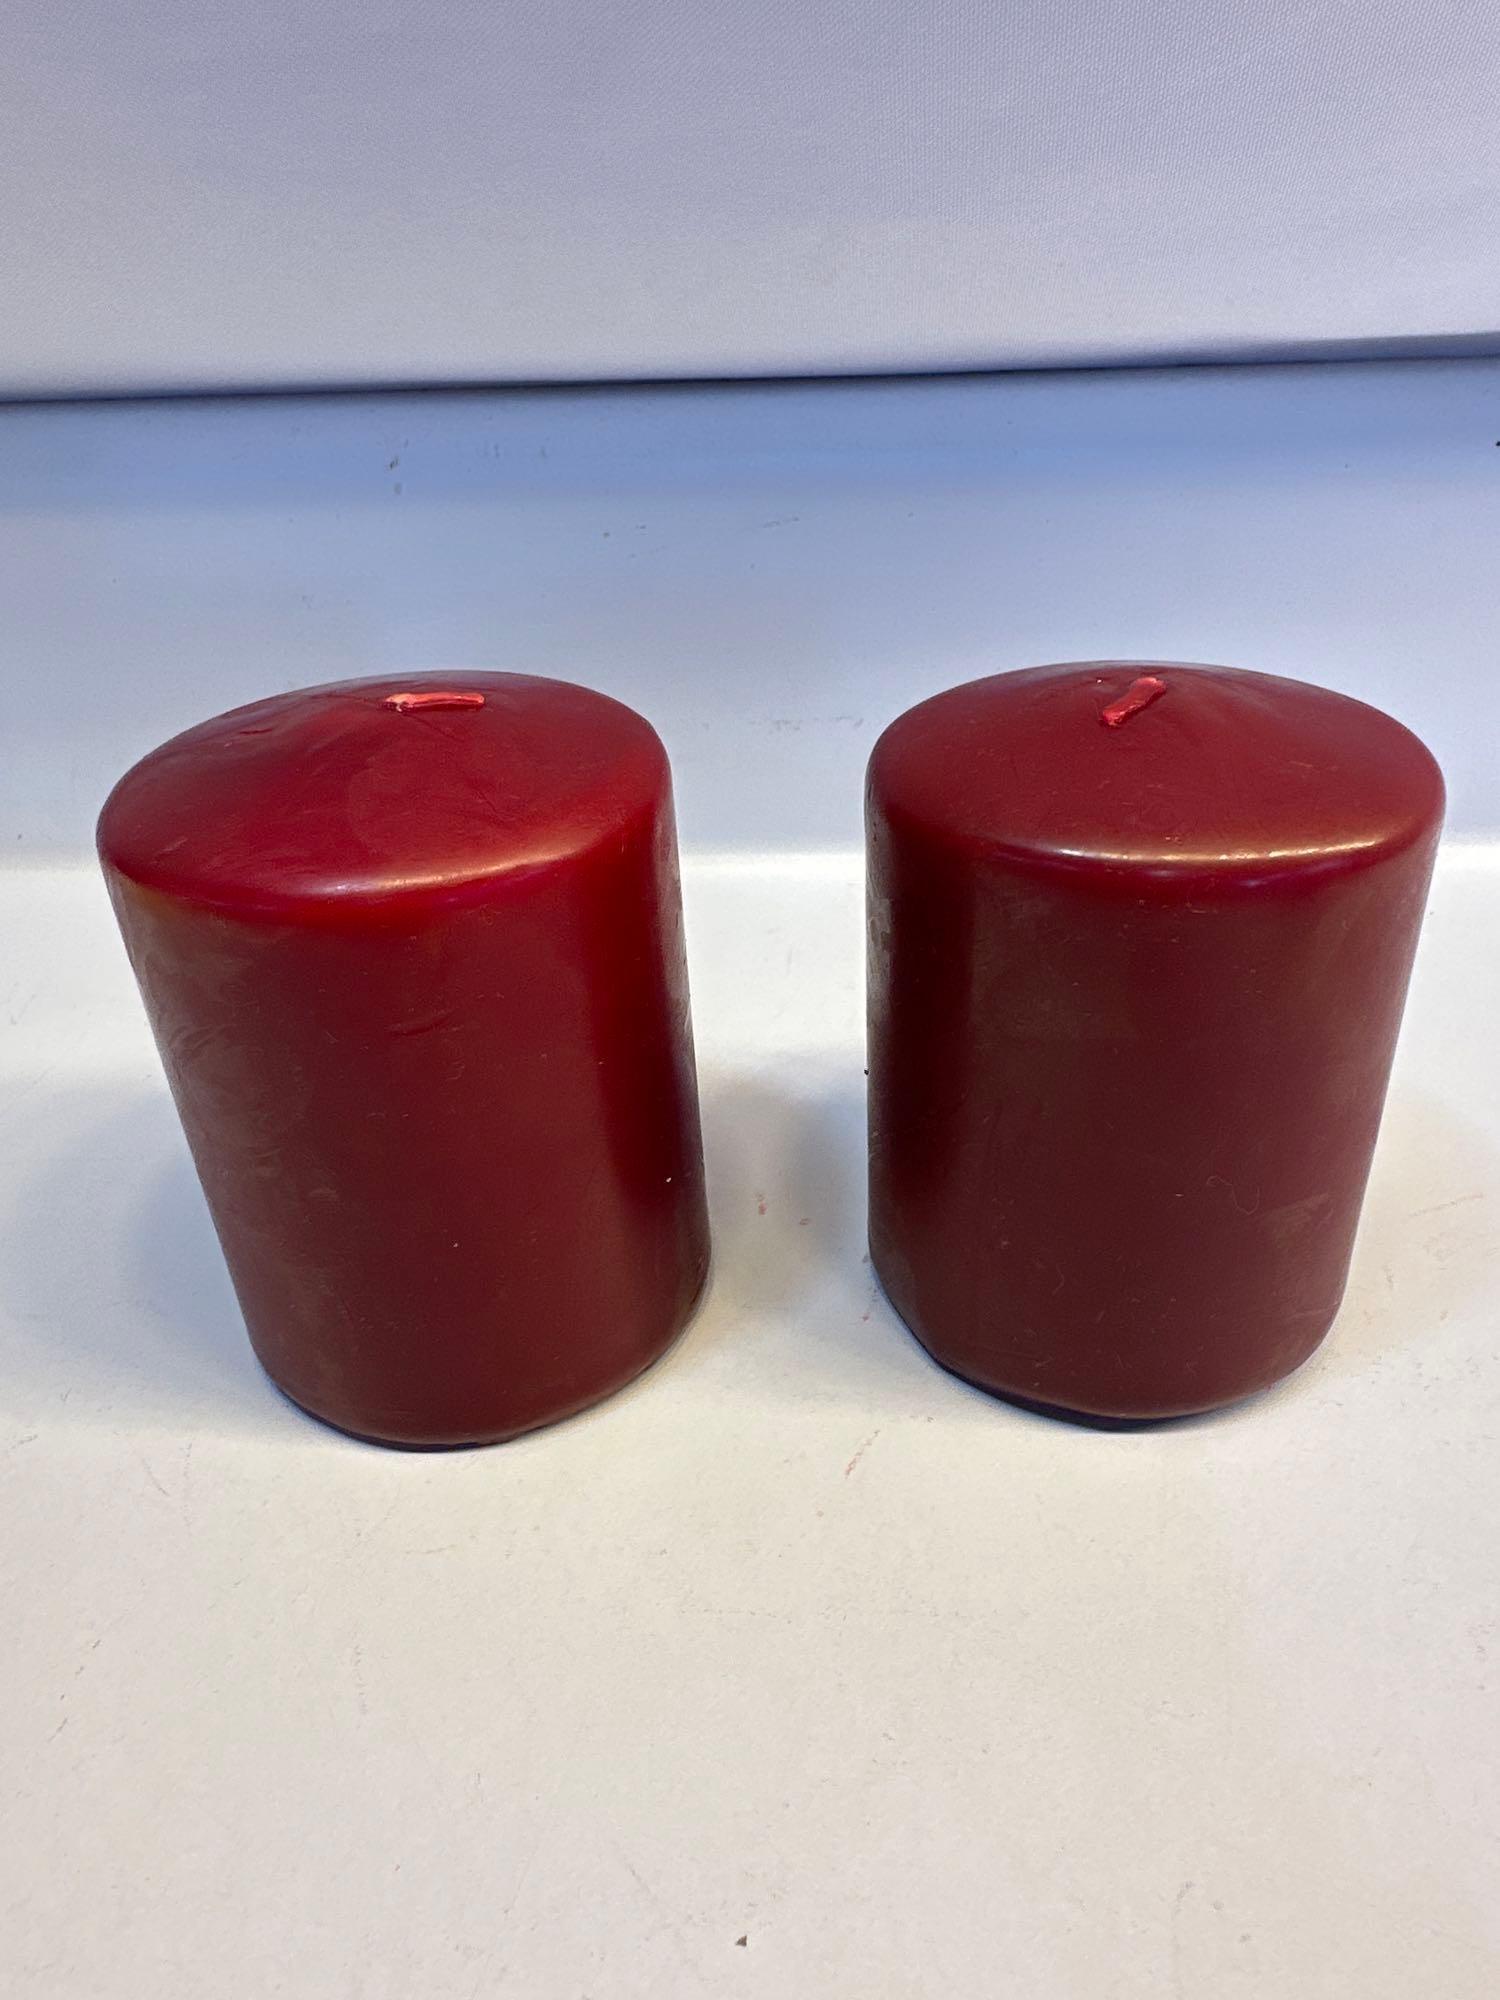 Set of 2 Cream Colored Candles/ Set of 2 Burgundy Candles/ 1 Purple Candle